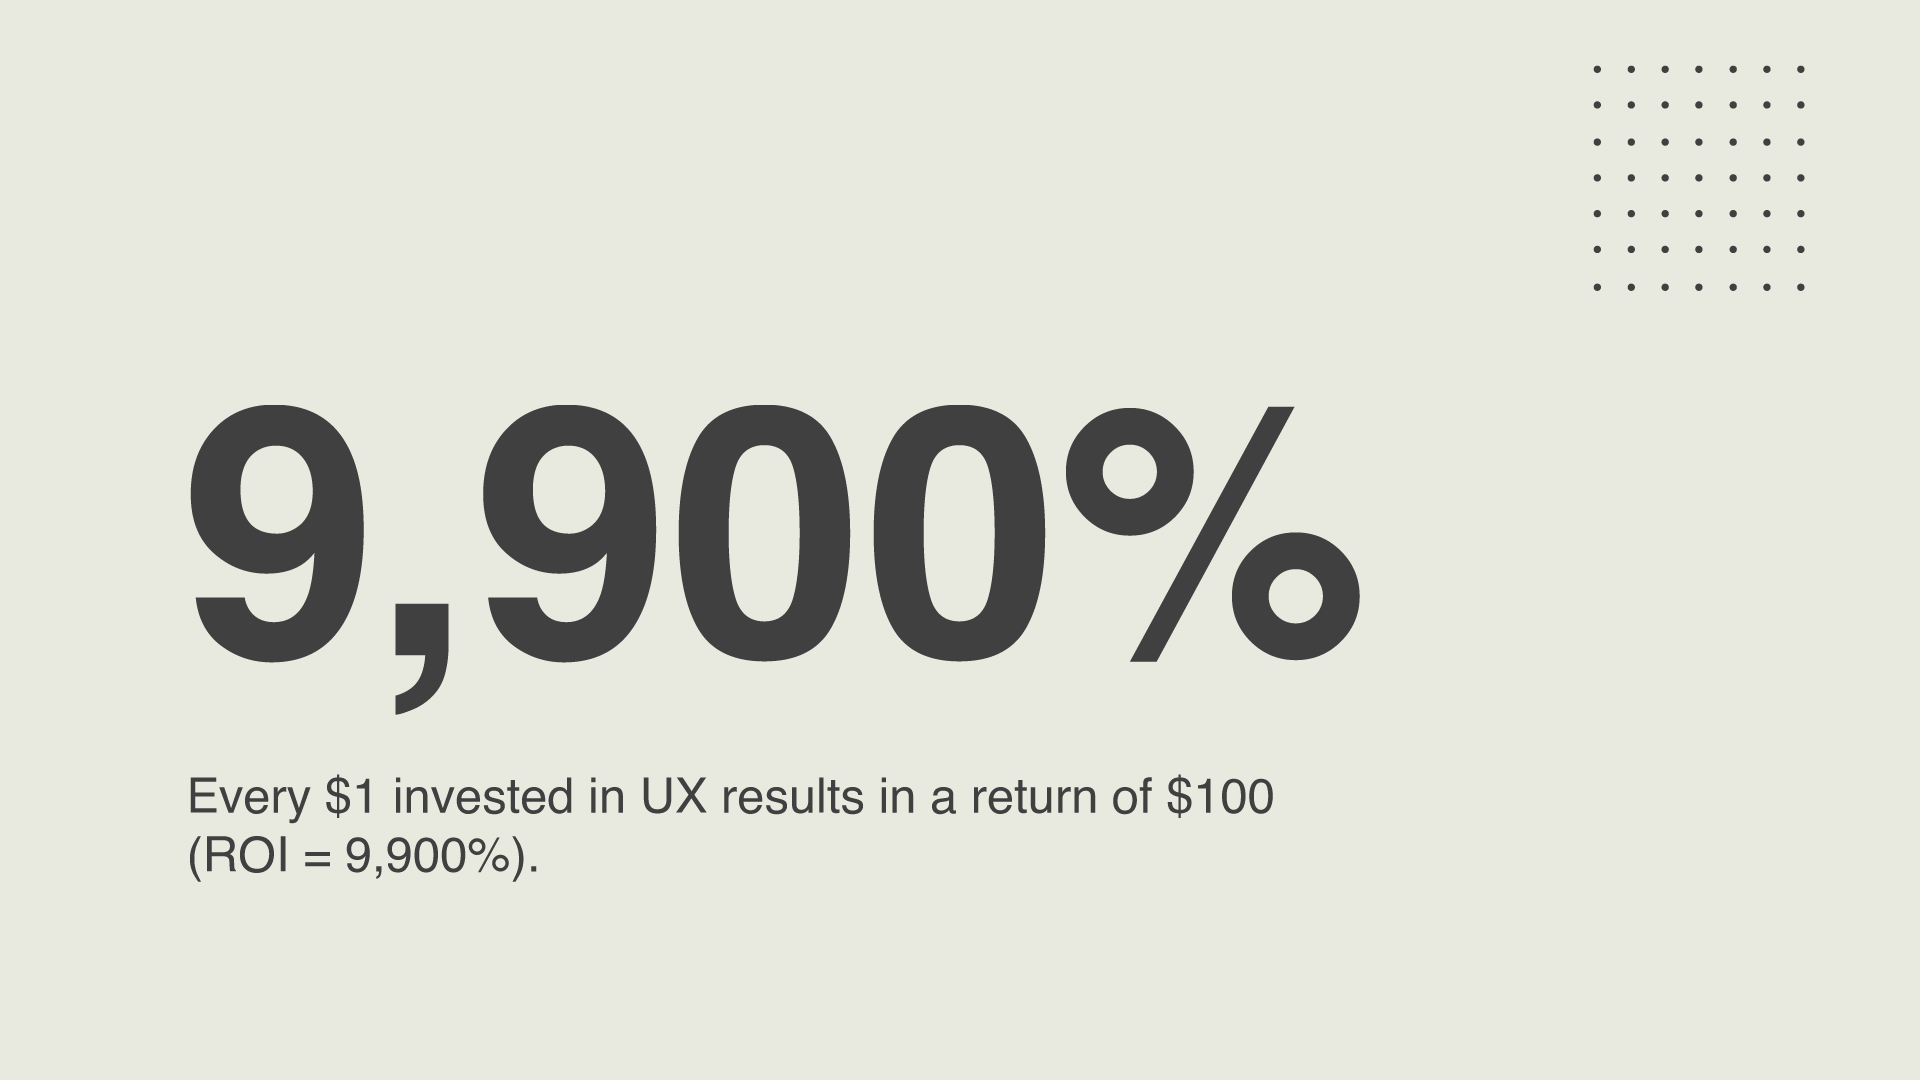 Unlocking the Power of UX Every $1 Invested Yields a $100 Return (ROI = 9,900%)